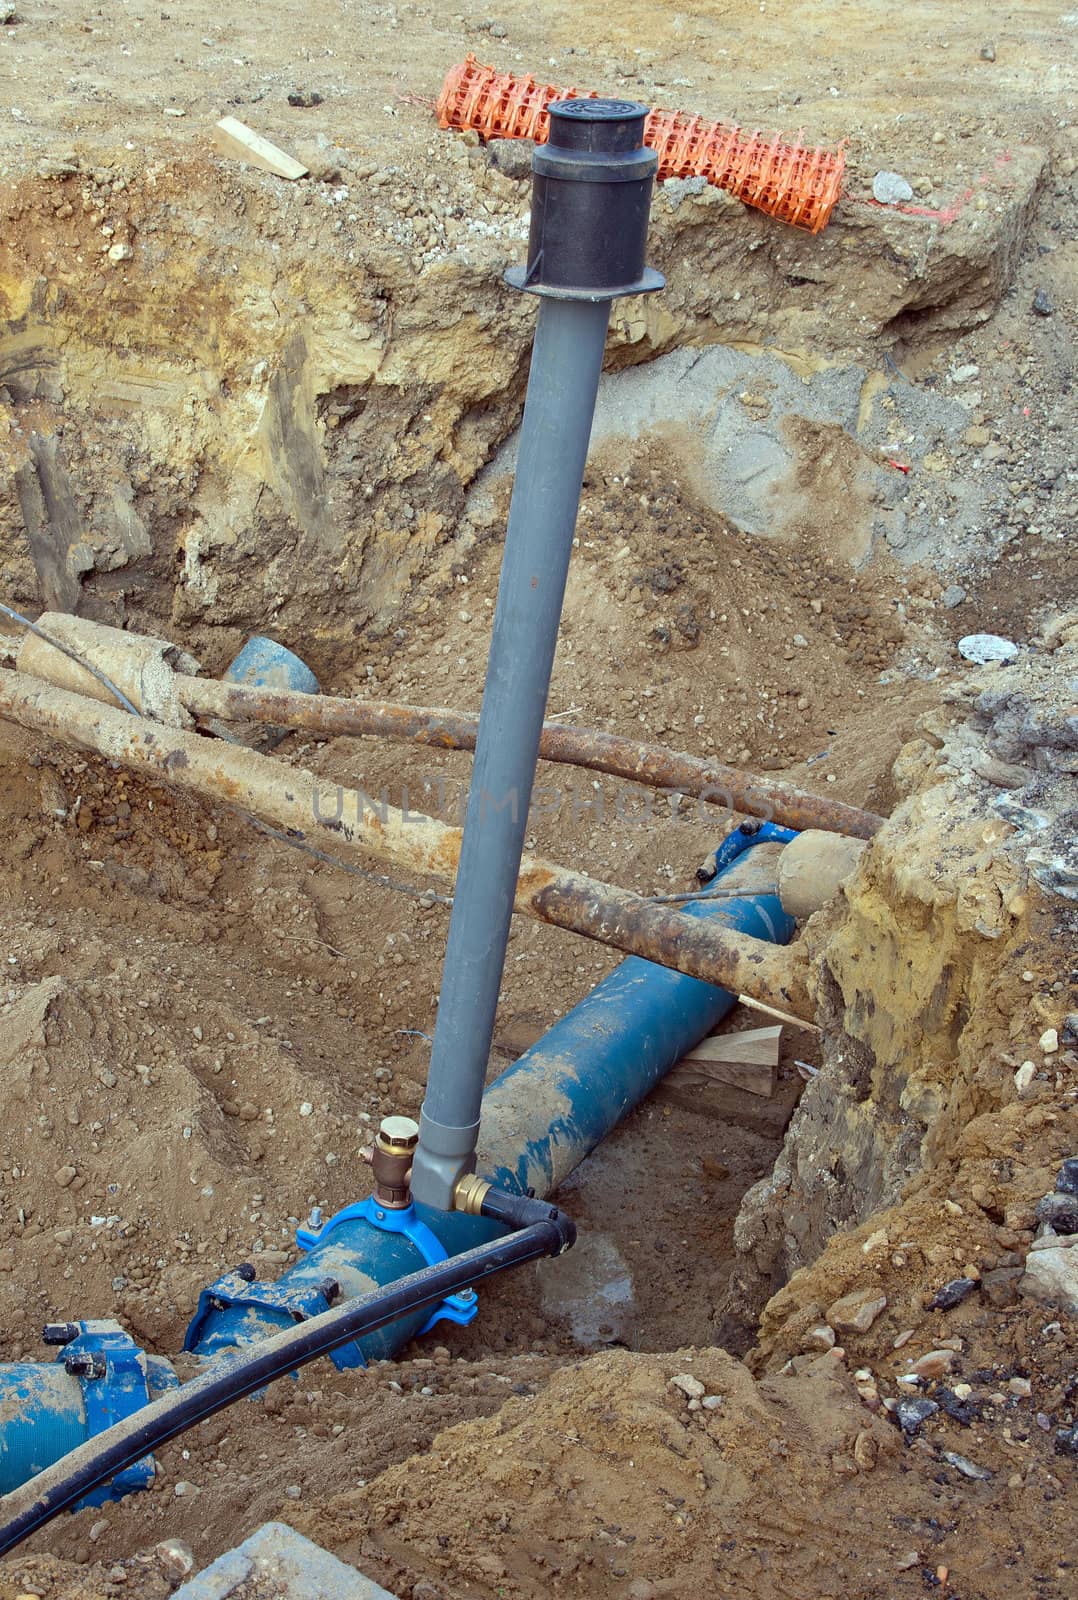 replacing the drinking water system: underground piping